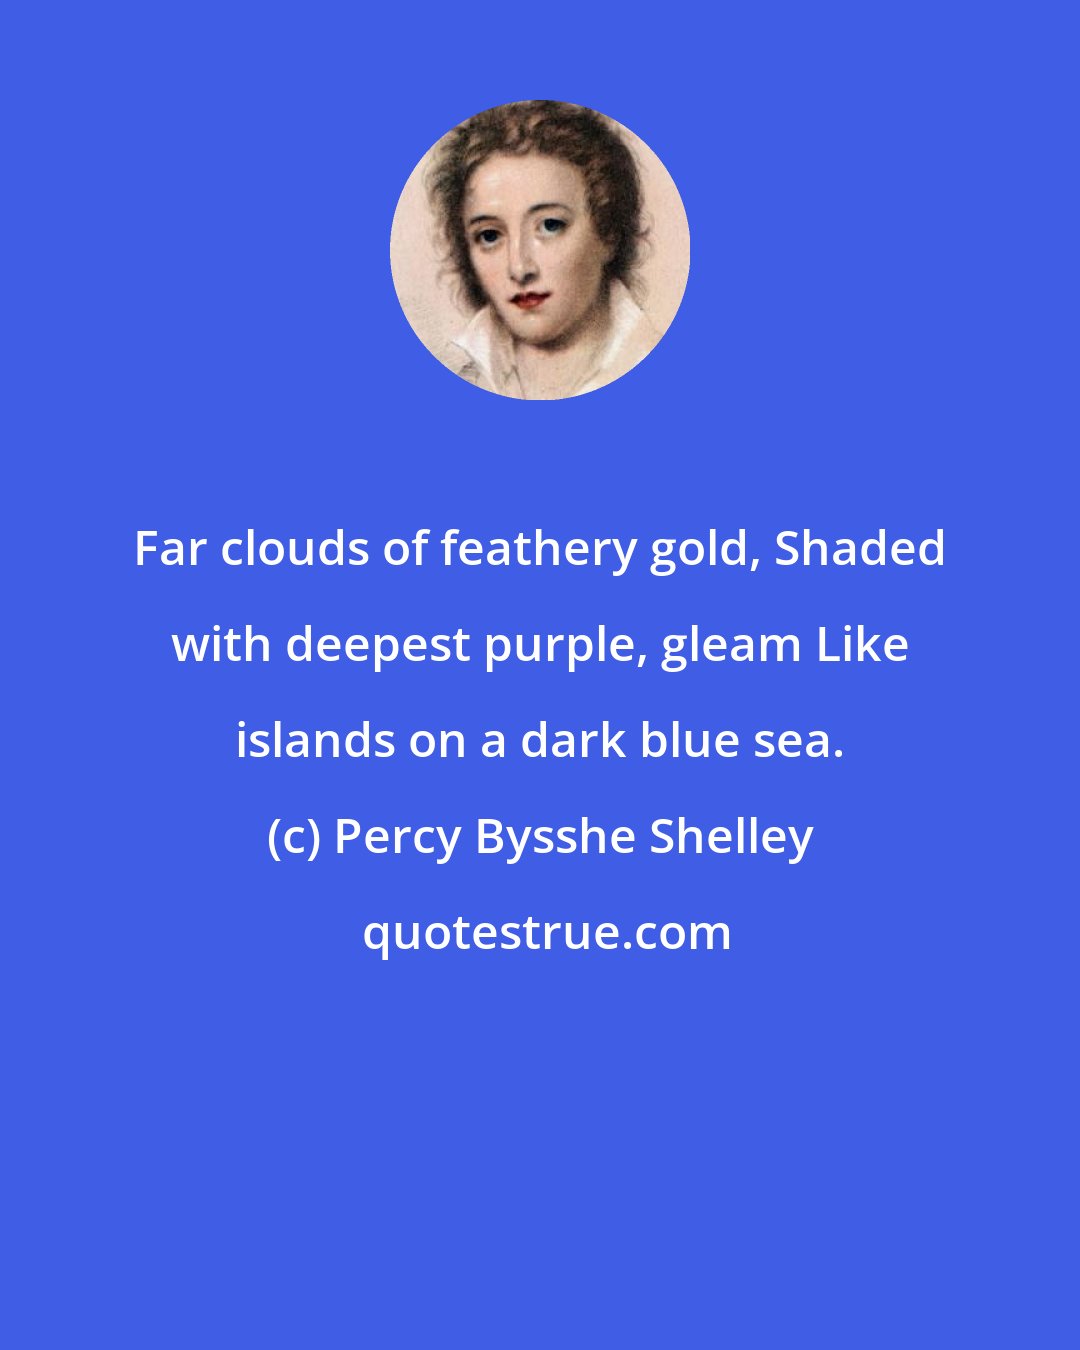 Percy Bysshe Shelley: Far clouds of feathery gold, Shaded with deepest purple, gleam Like islands on a dark blue sea.